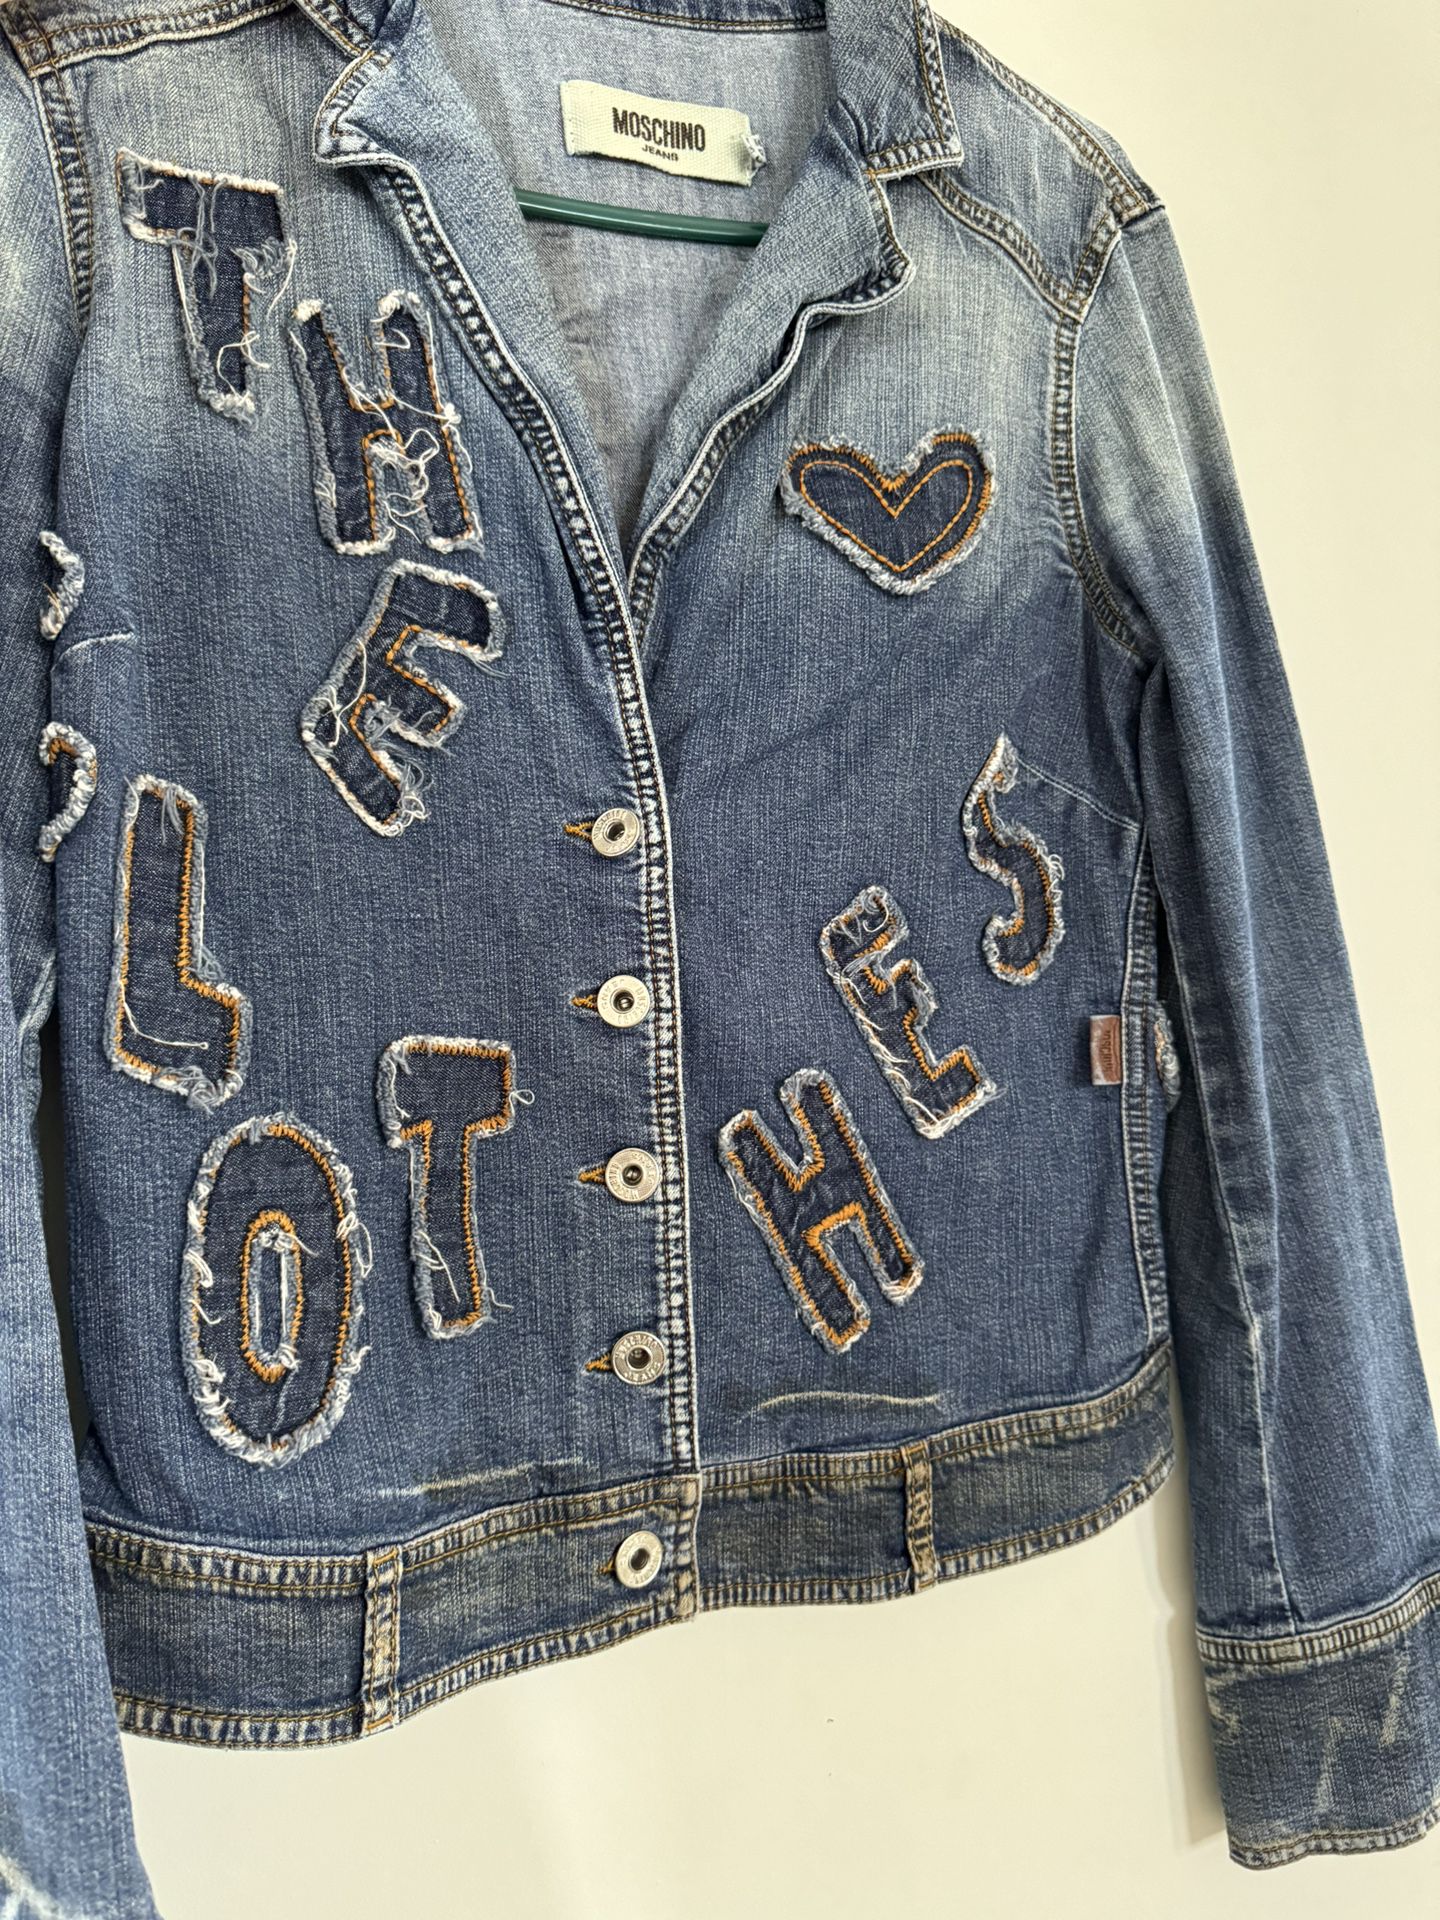 Moschino Jeans Jacket 